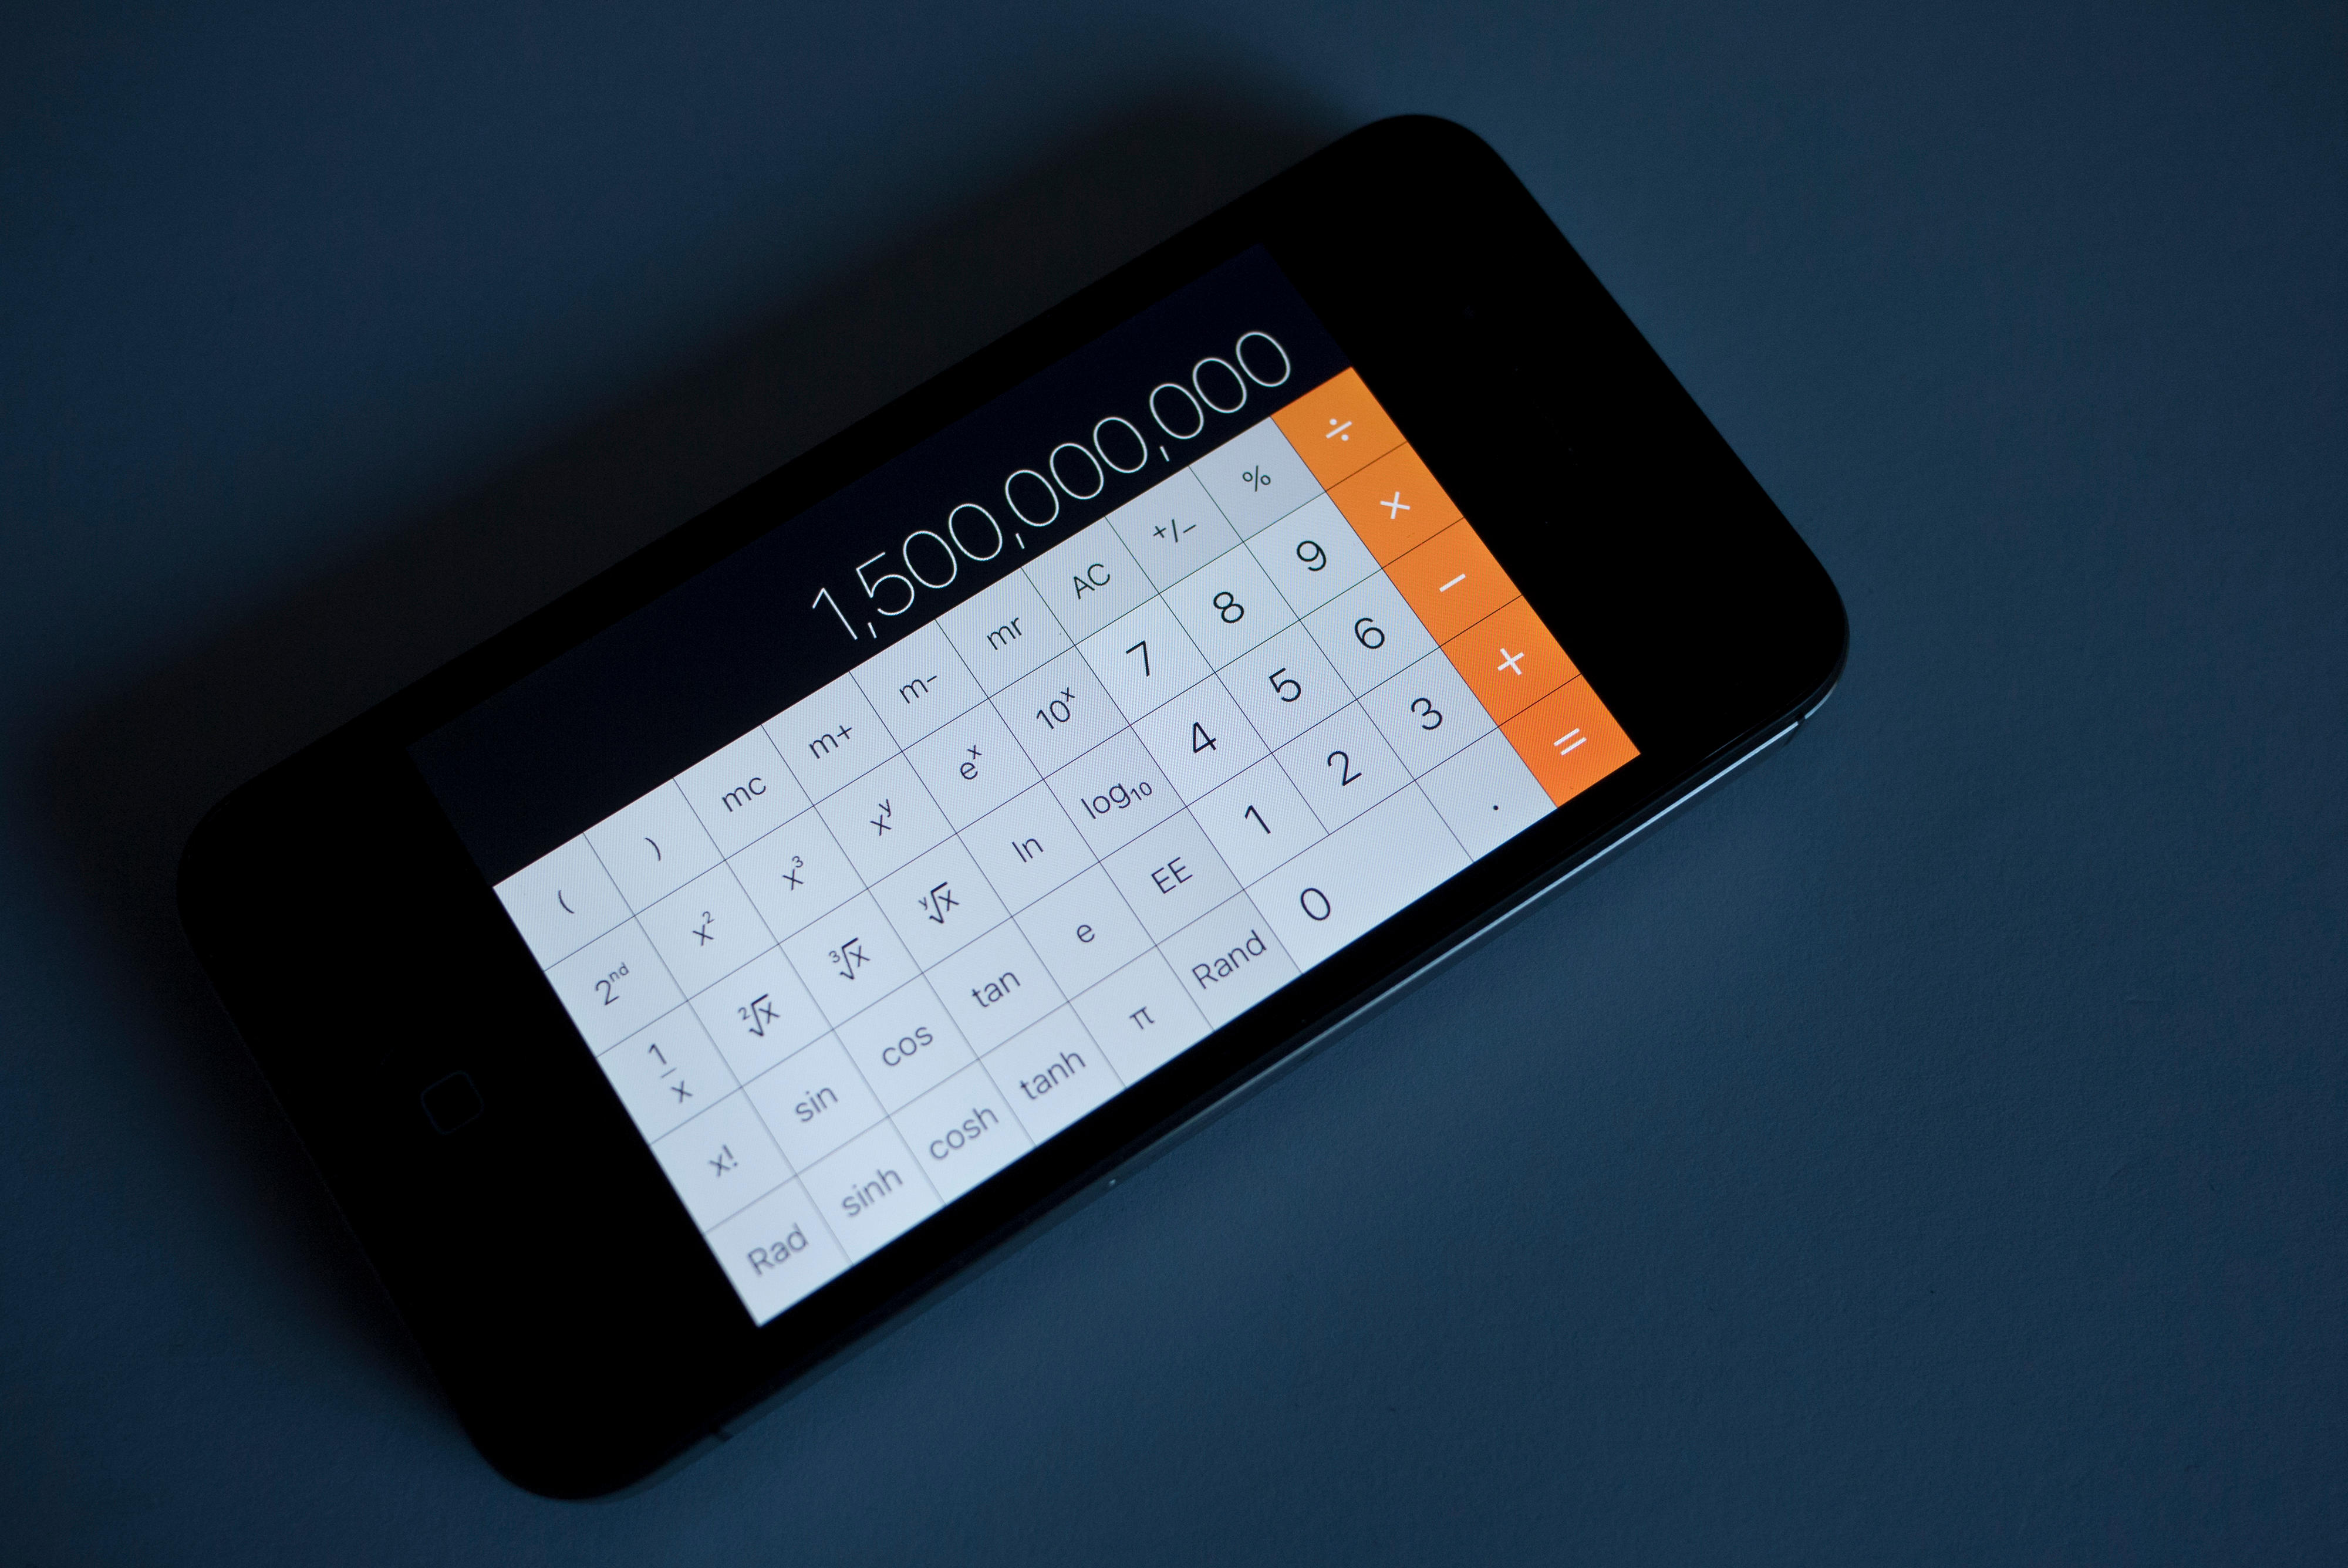 The stock iOS calculator has several tricks up its sleeve - PhoneArena